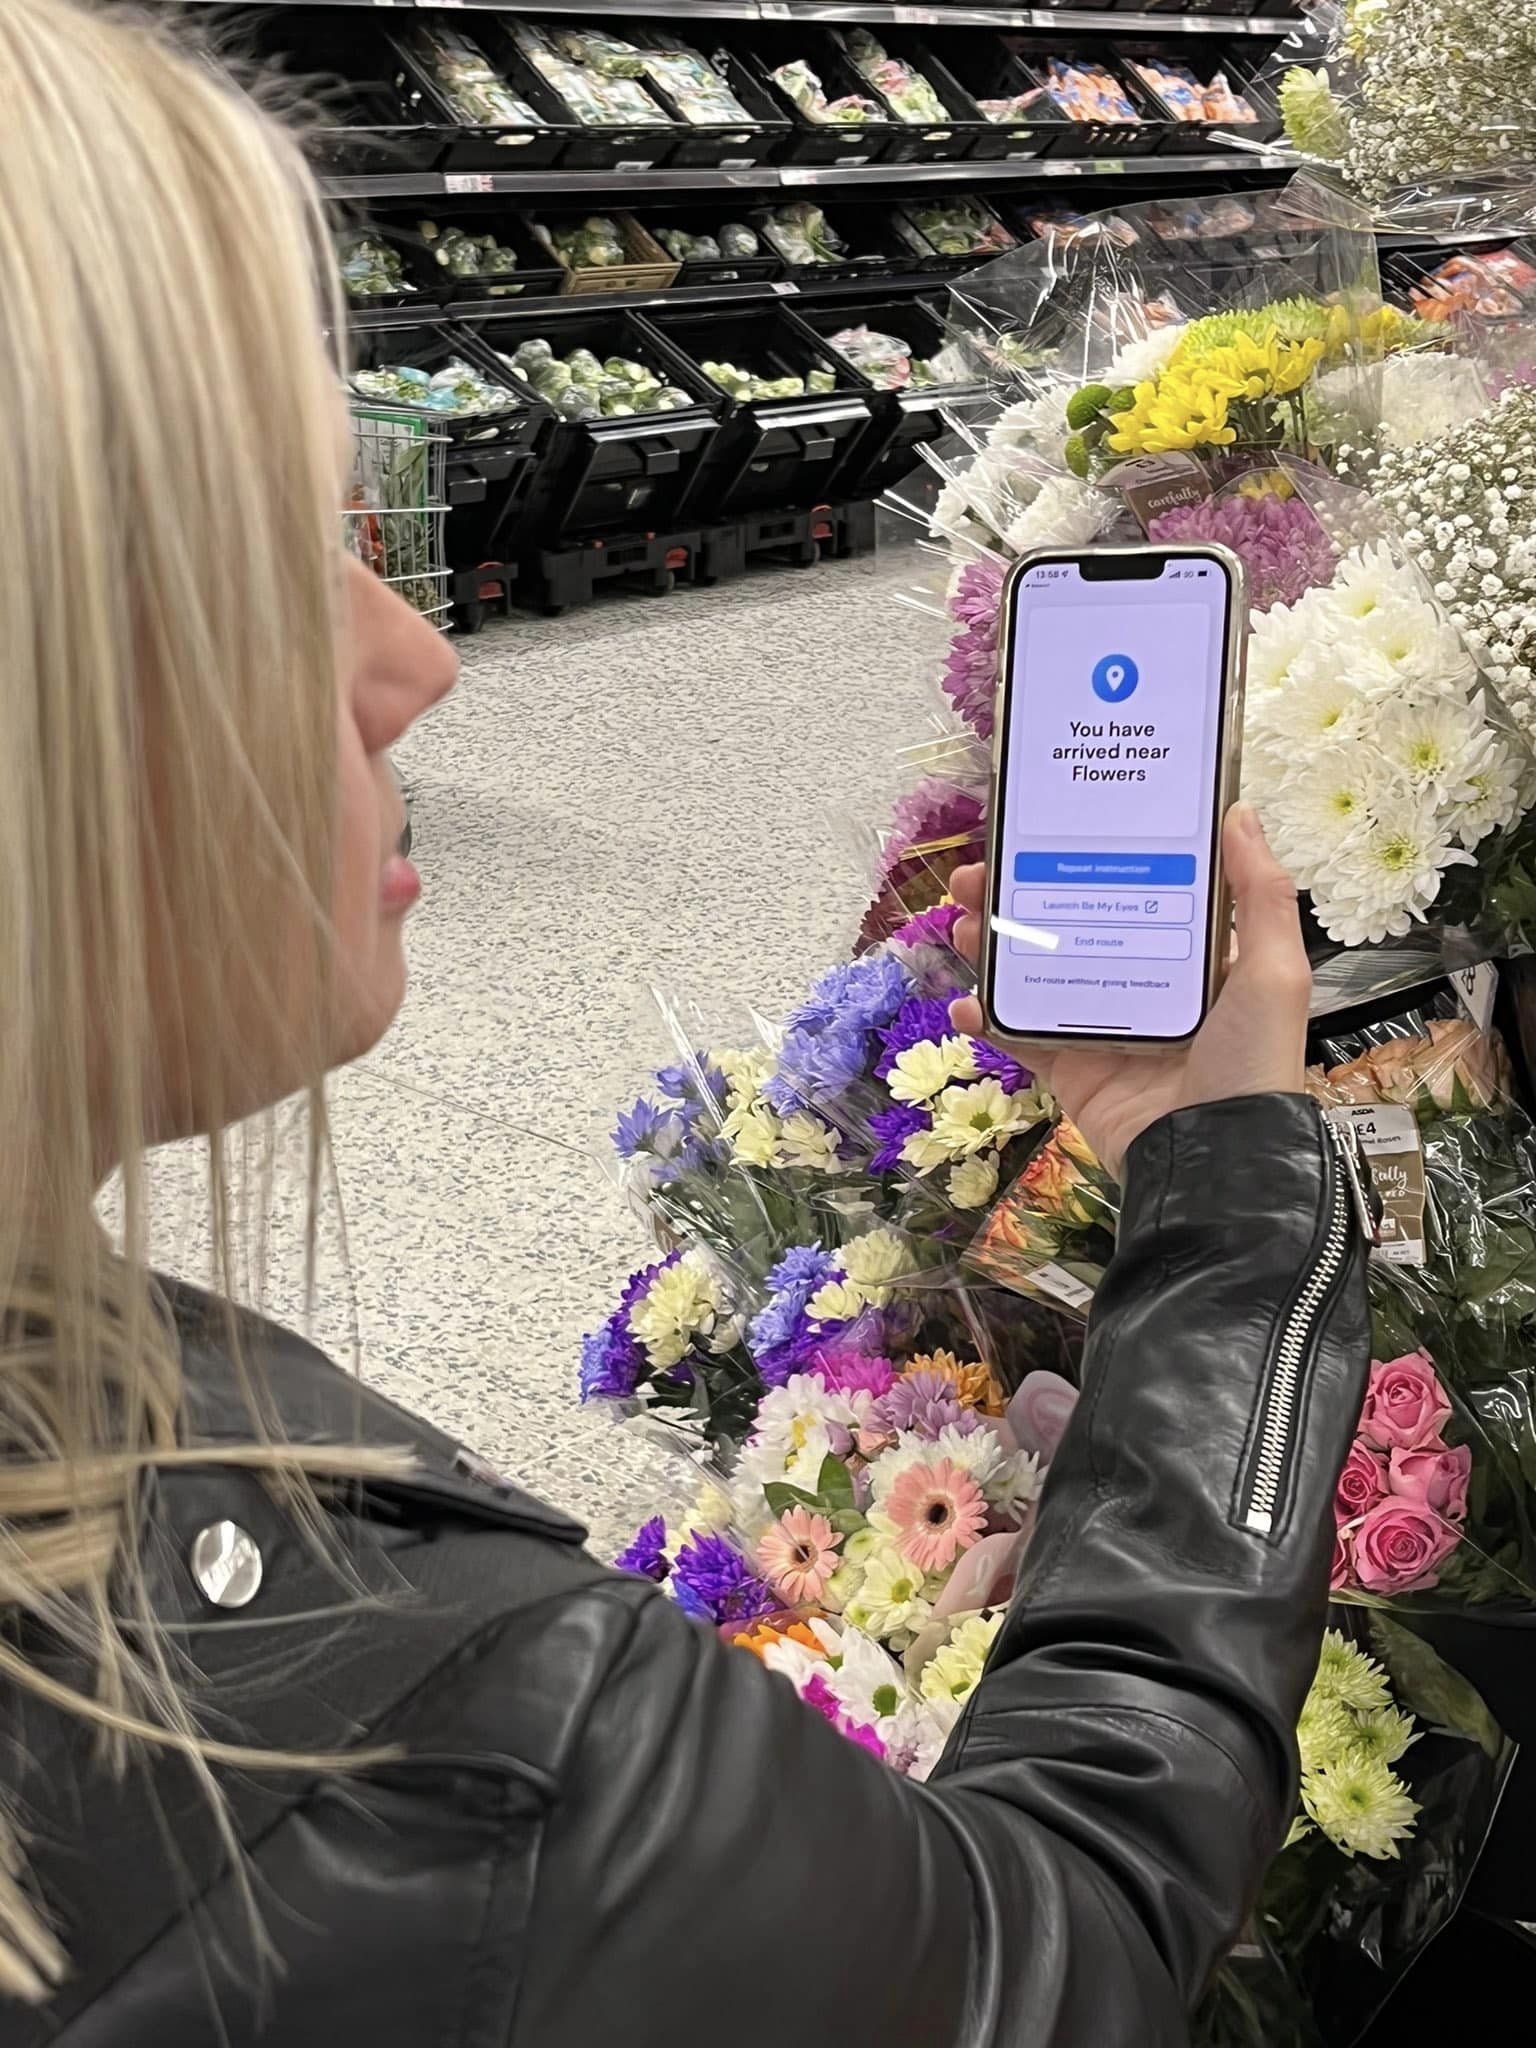 Engagement manager, Kelly Barton, is standing with her phone in her hand. She is showing the camera the GoodMaps app, which says: "You have arrived near flowers".